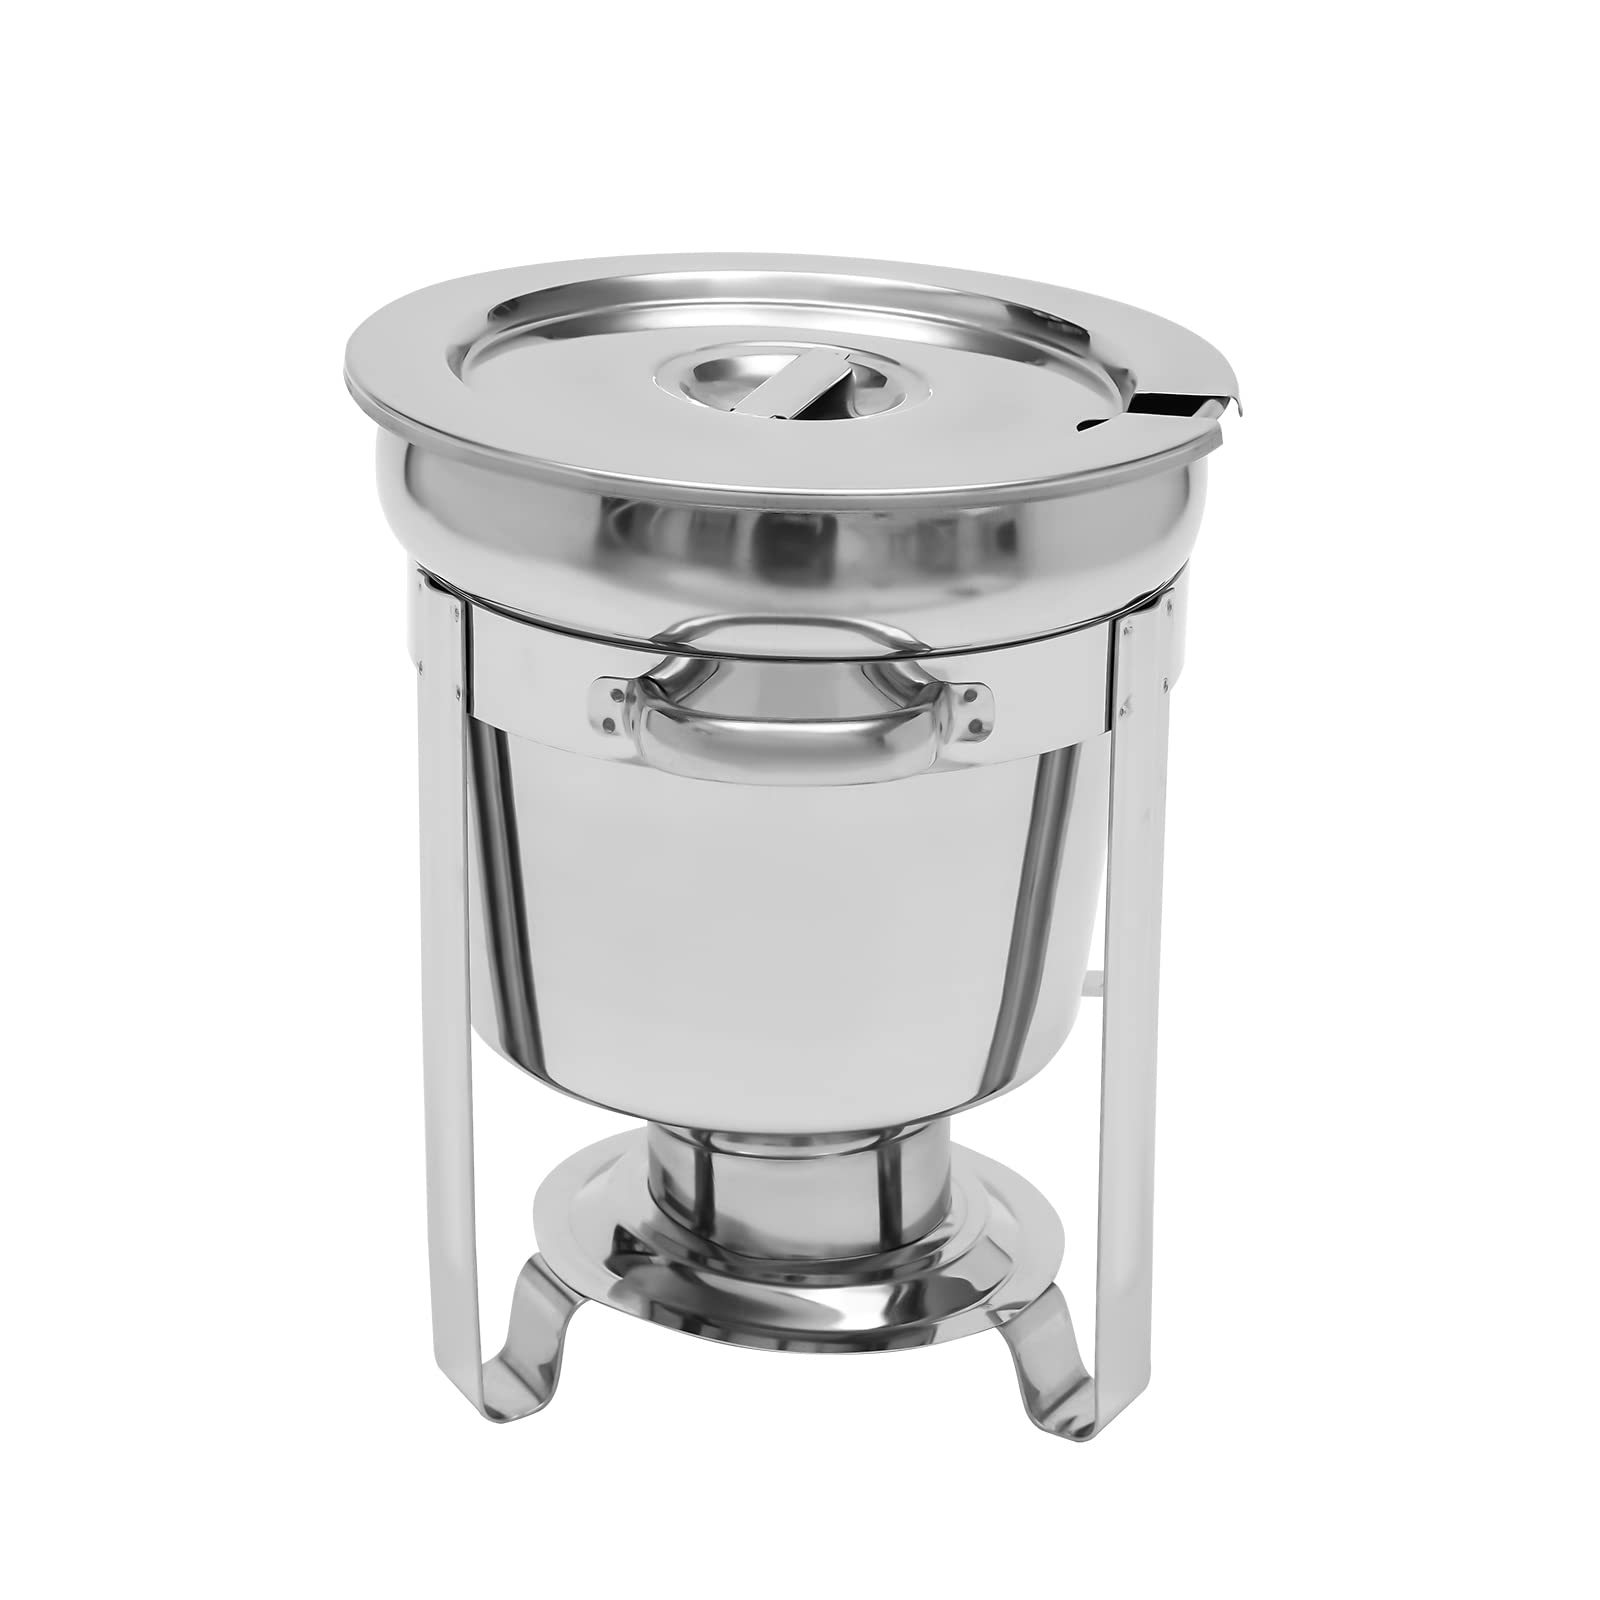 Soup Warmer,7.4 Qt. Soup Catering Supplies Food Warmer,Chafing Dish Buffet Set, Food Warmers for Parties